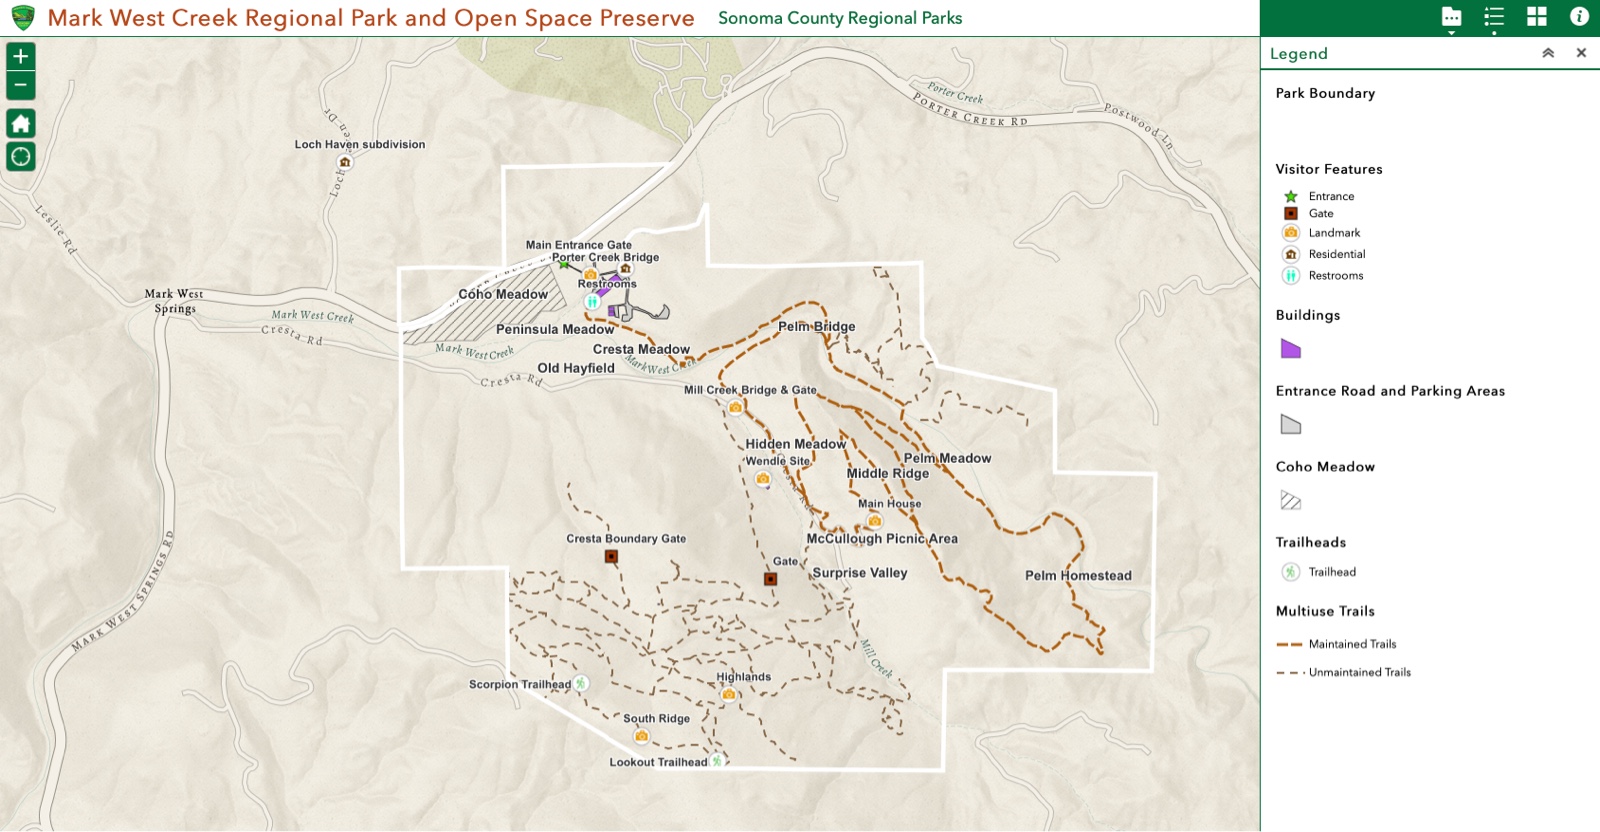 A thumbnail image of an interactive map which displays the boundaries, visitor features, trailheads and multiuse trail system of the Mark West Creek Regional Park & Open Space Preserve.